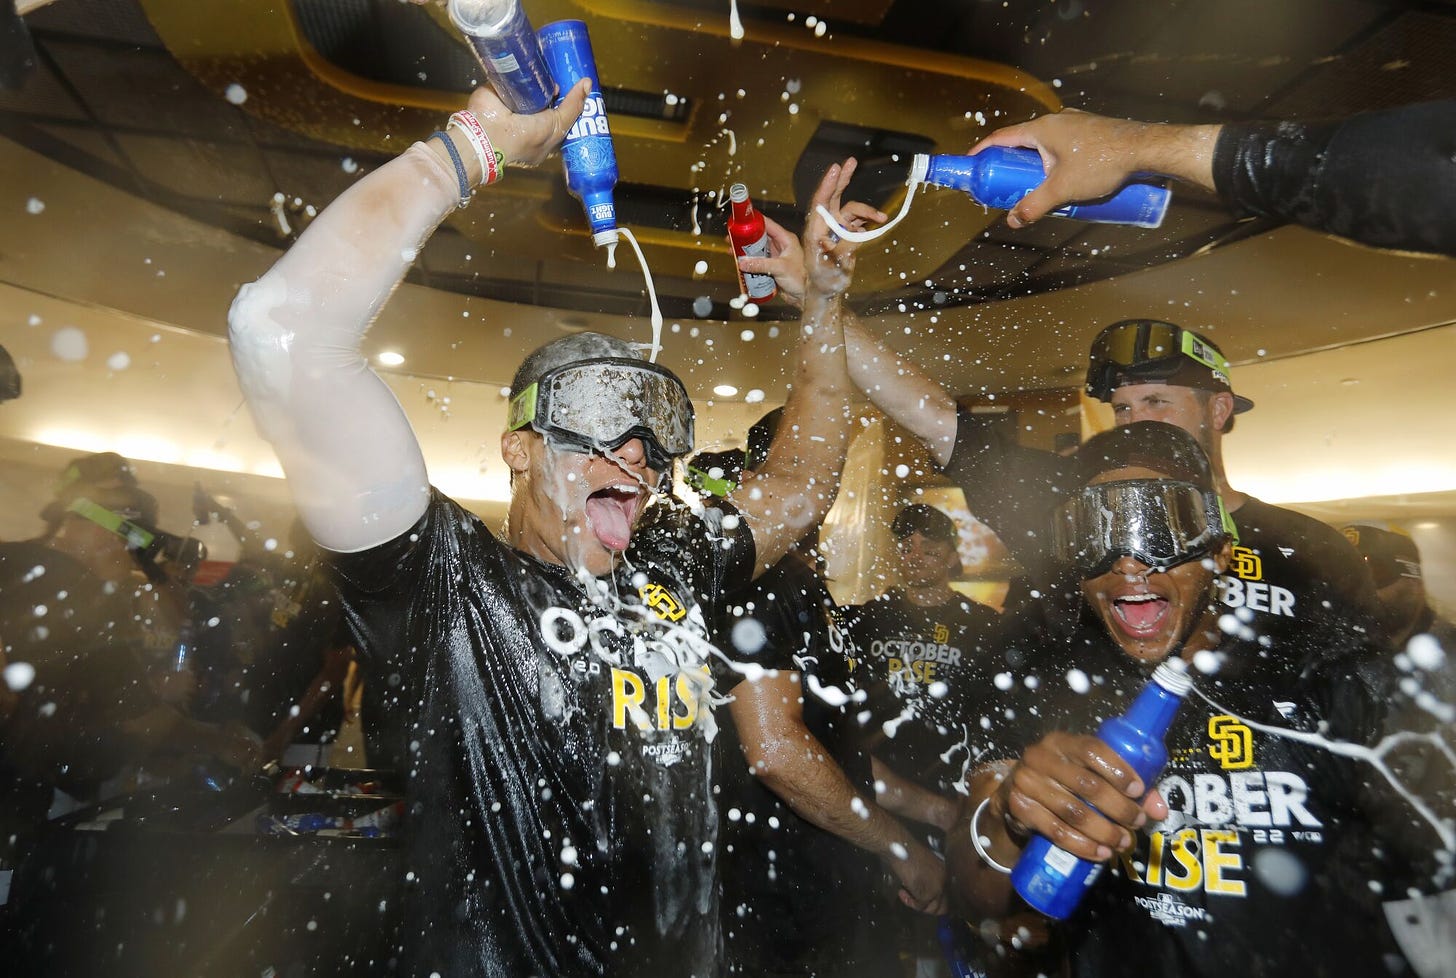 Padres celebrate reaching playoffs for seventh time in franchise history -  The San Diego Union-Tribune